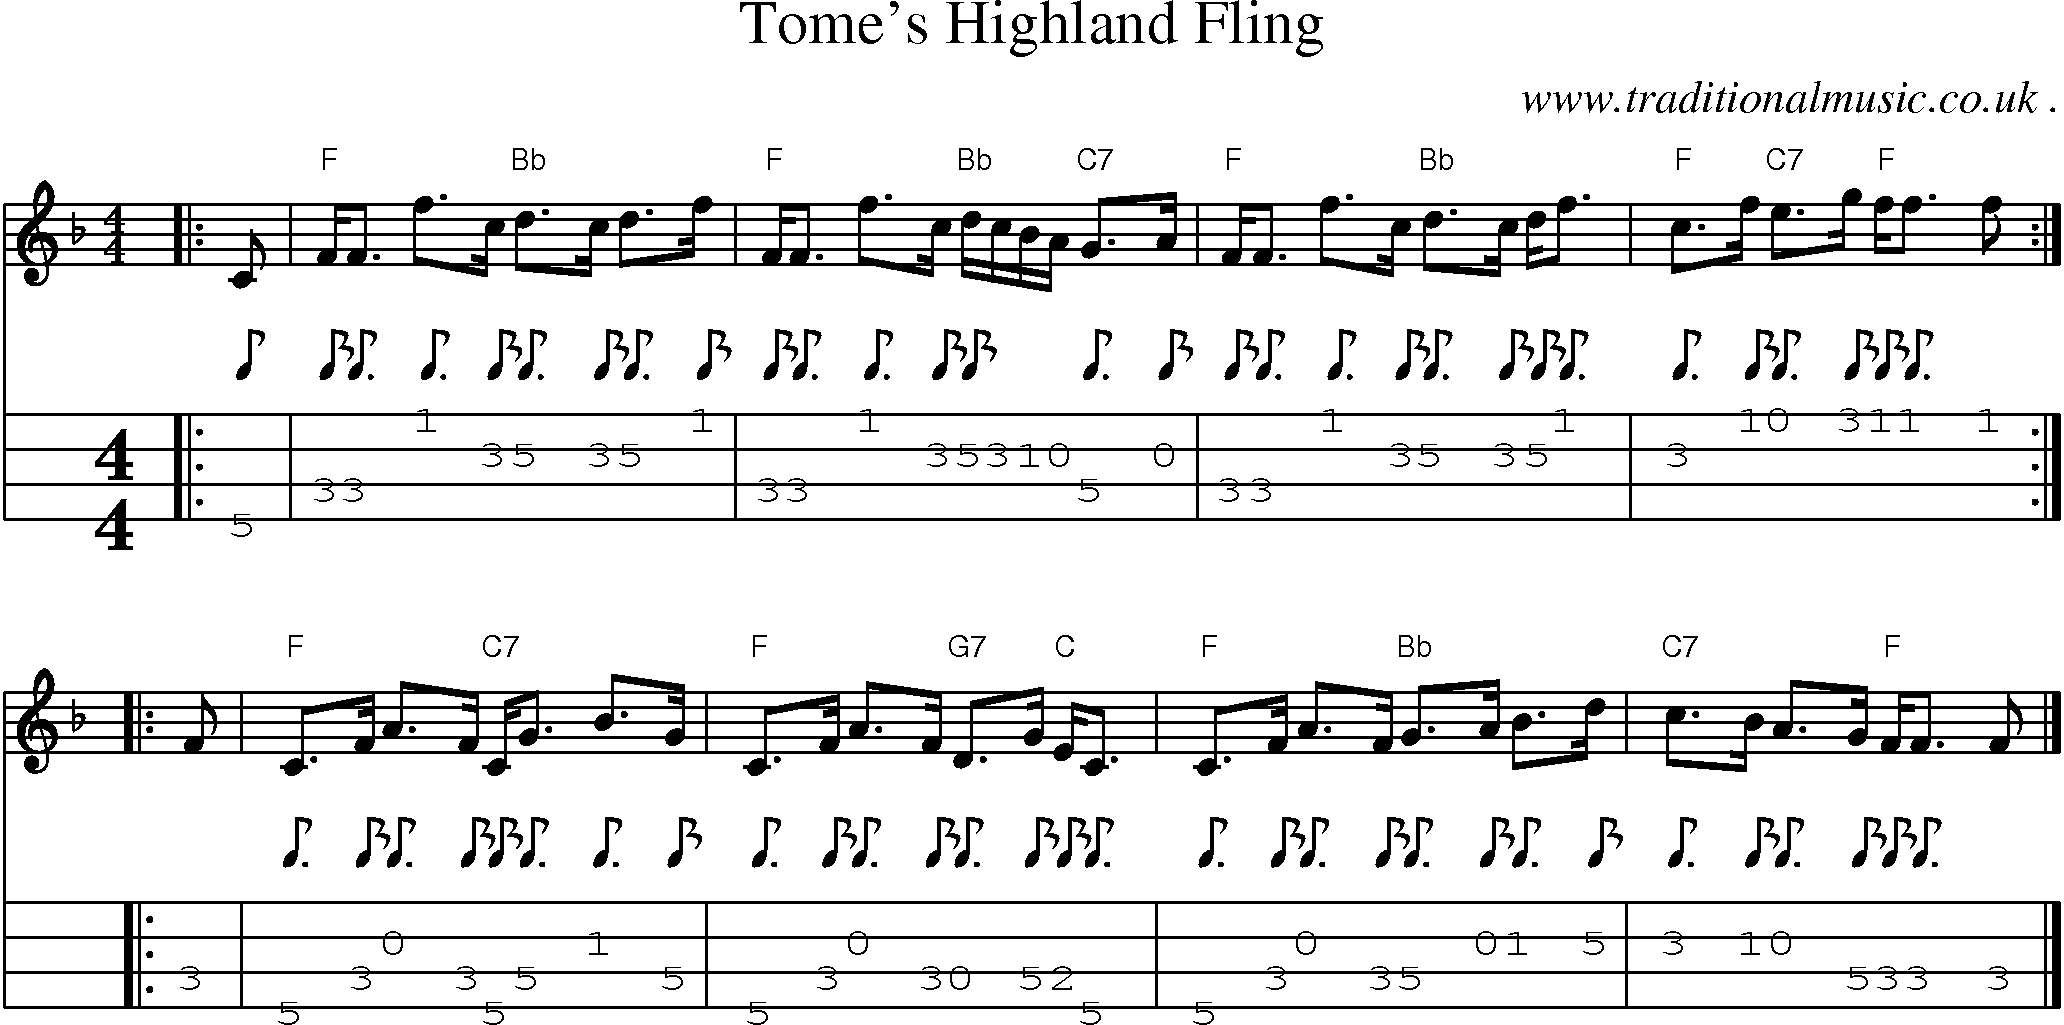 Sheet-music  score, Chords and Mandolin Tabs for Tomes Highland Fling